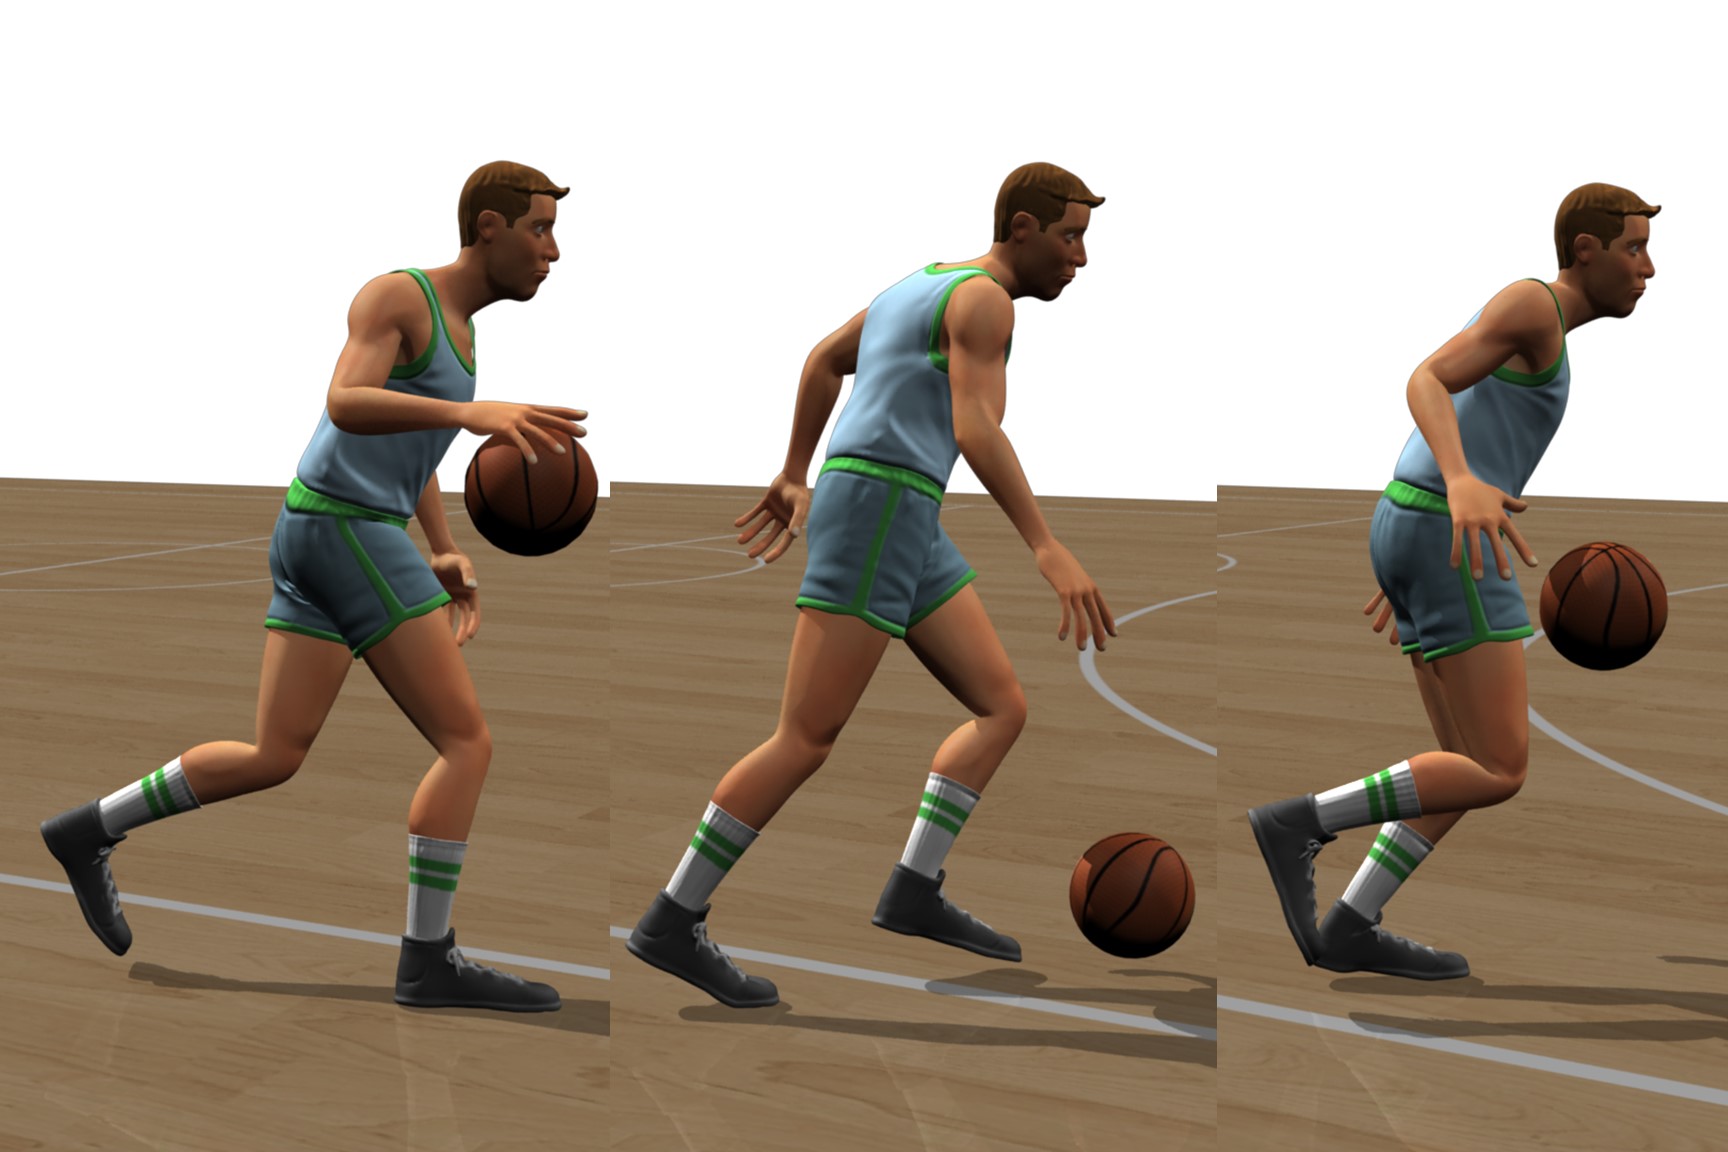 How a Computer Learns To Dribble Practice, Practice, Practice